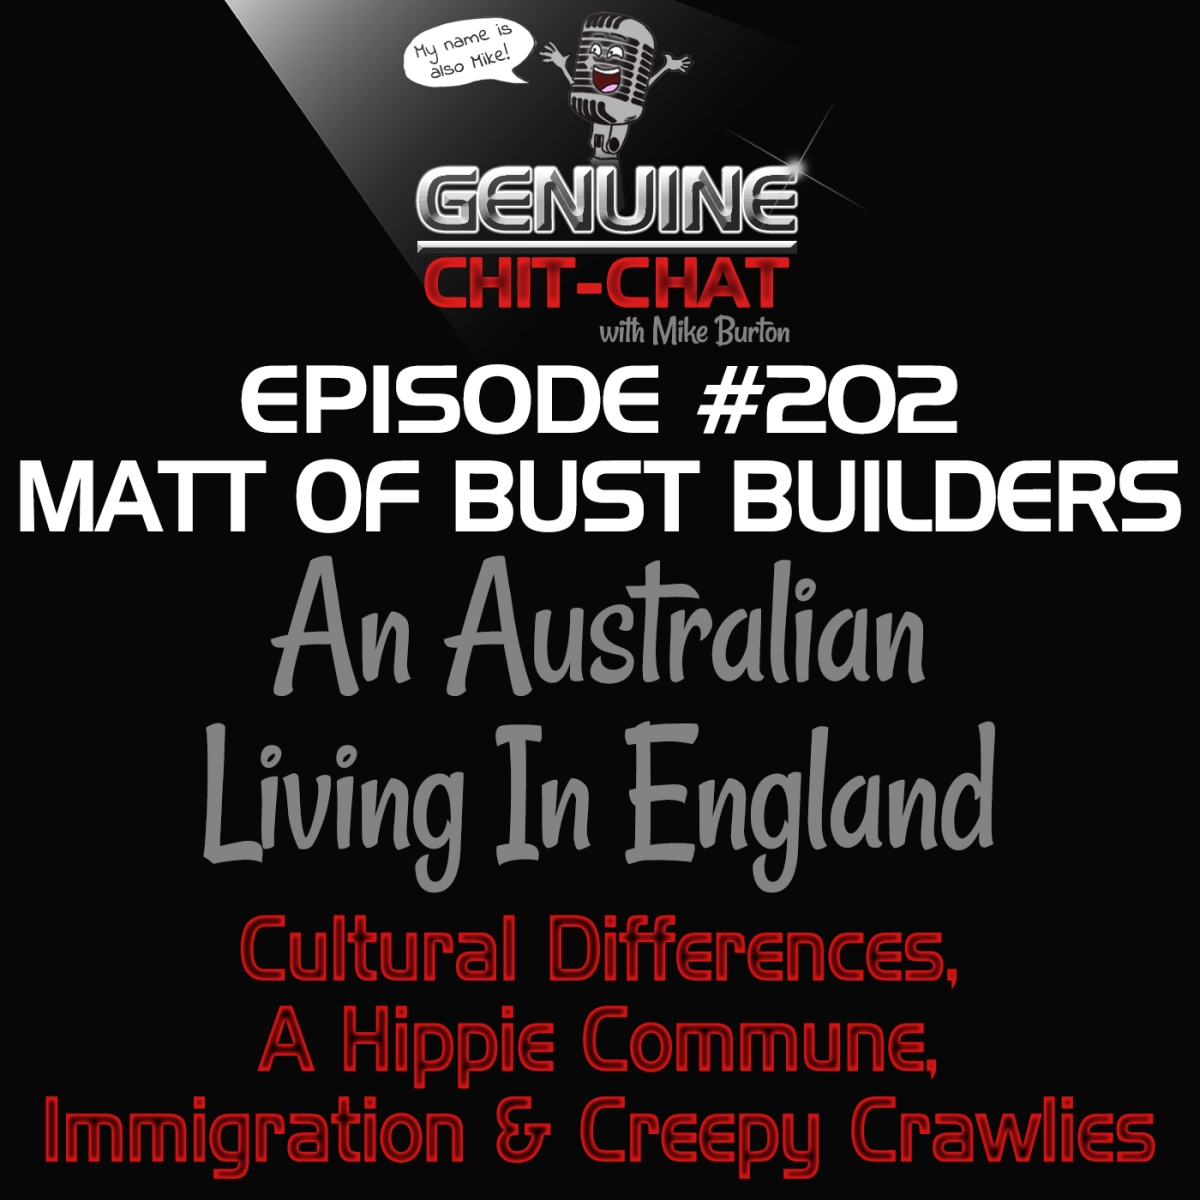 #202 – An Australian Living In England: Cultural Differences, A Hippie Commune, Immigration & Creepy Crawlies With Matt